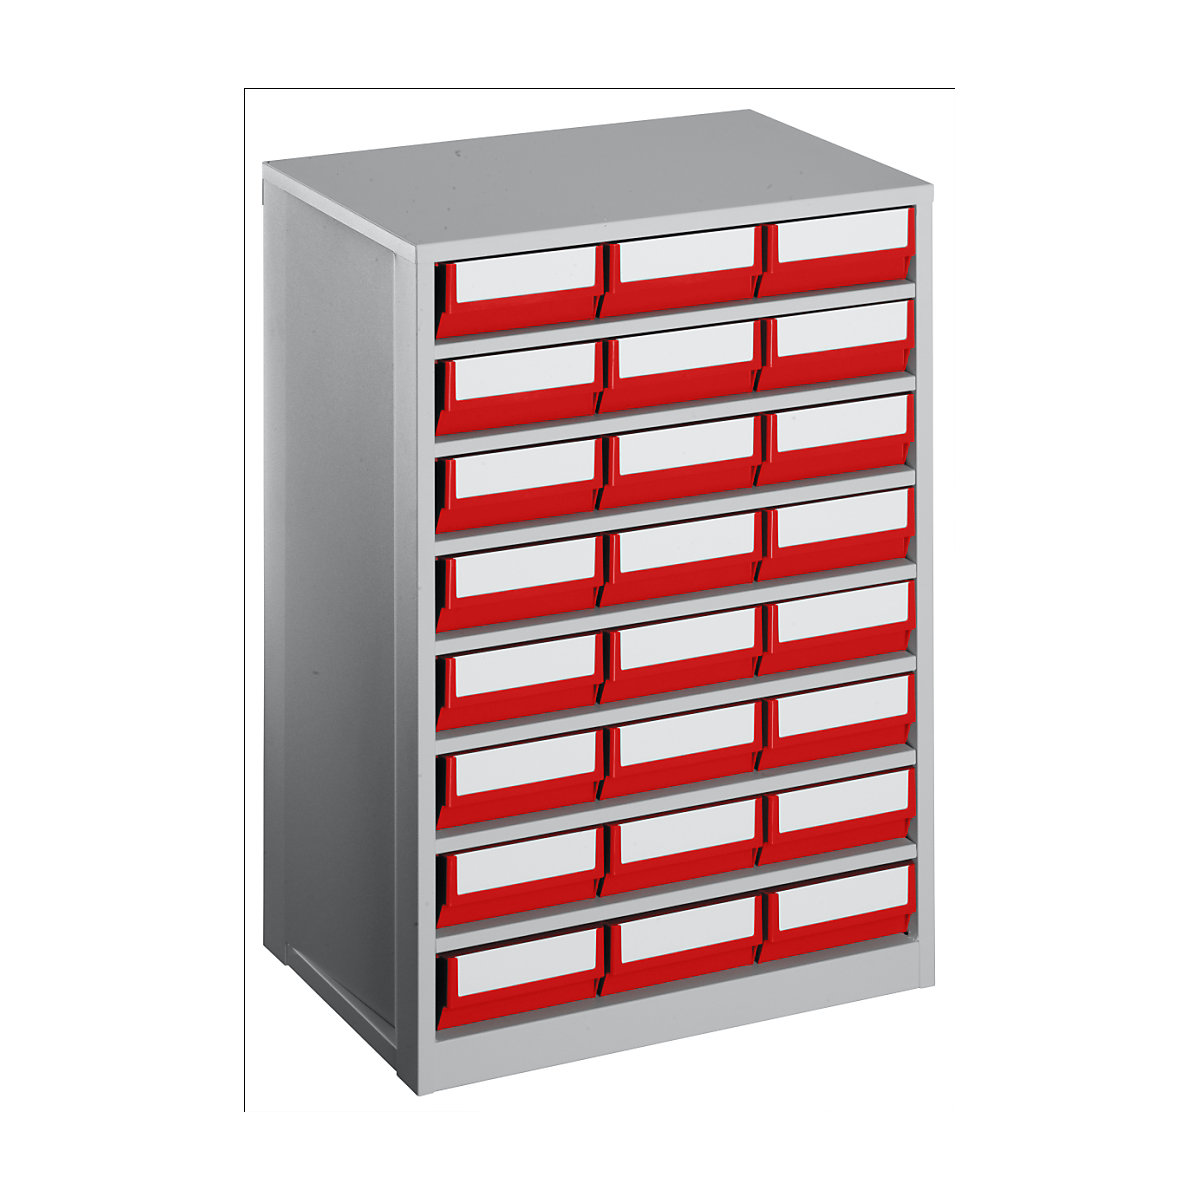 Drawer cabinet, max. housing load 240 kg, HxWxD 862 x 600 x 417 mm, 24 drawers, red drawers-9